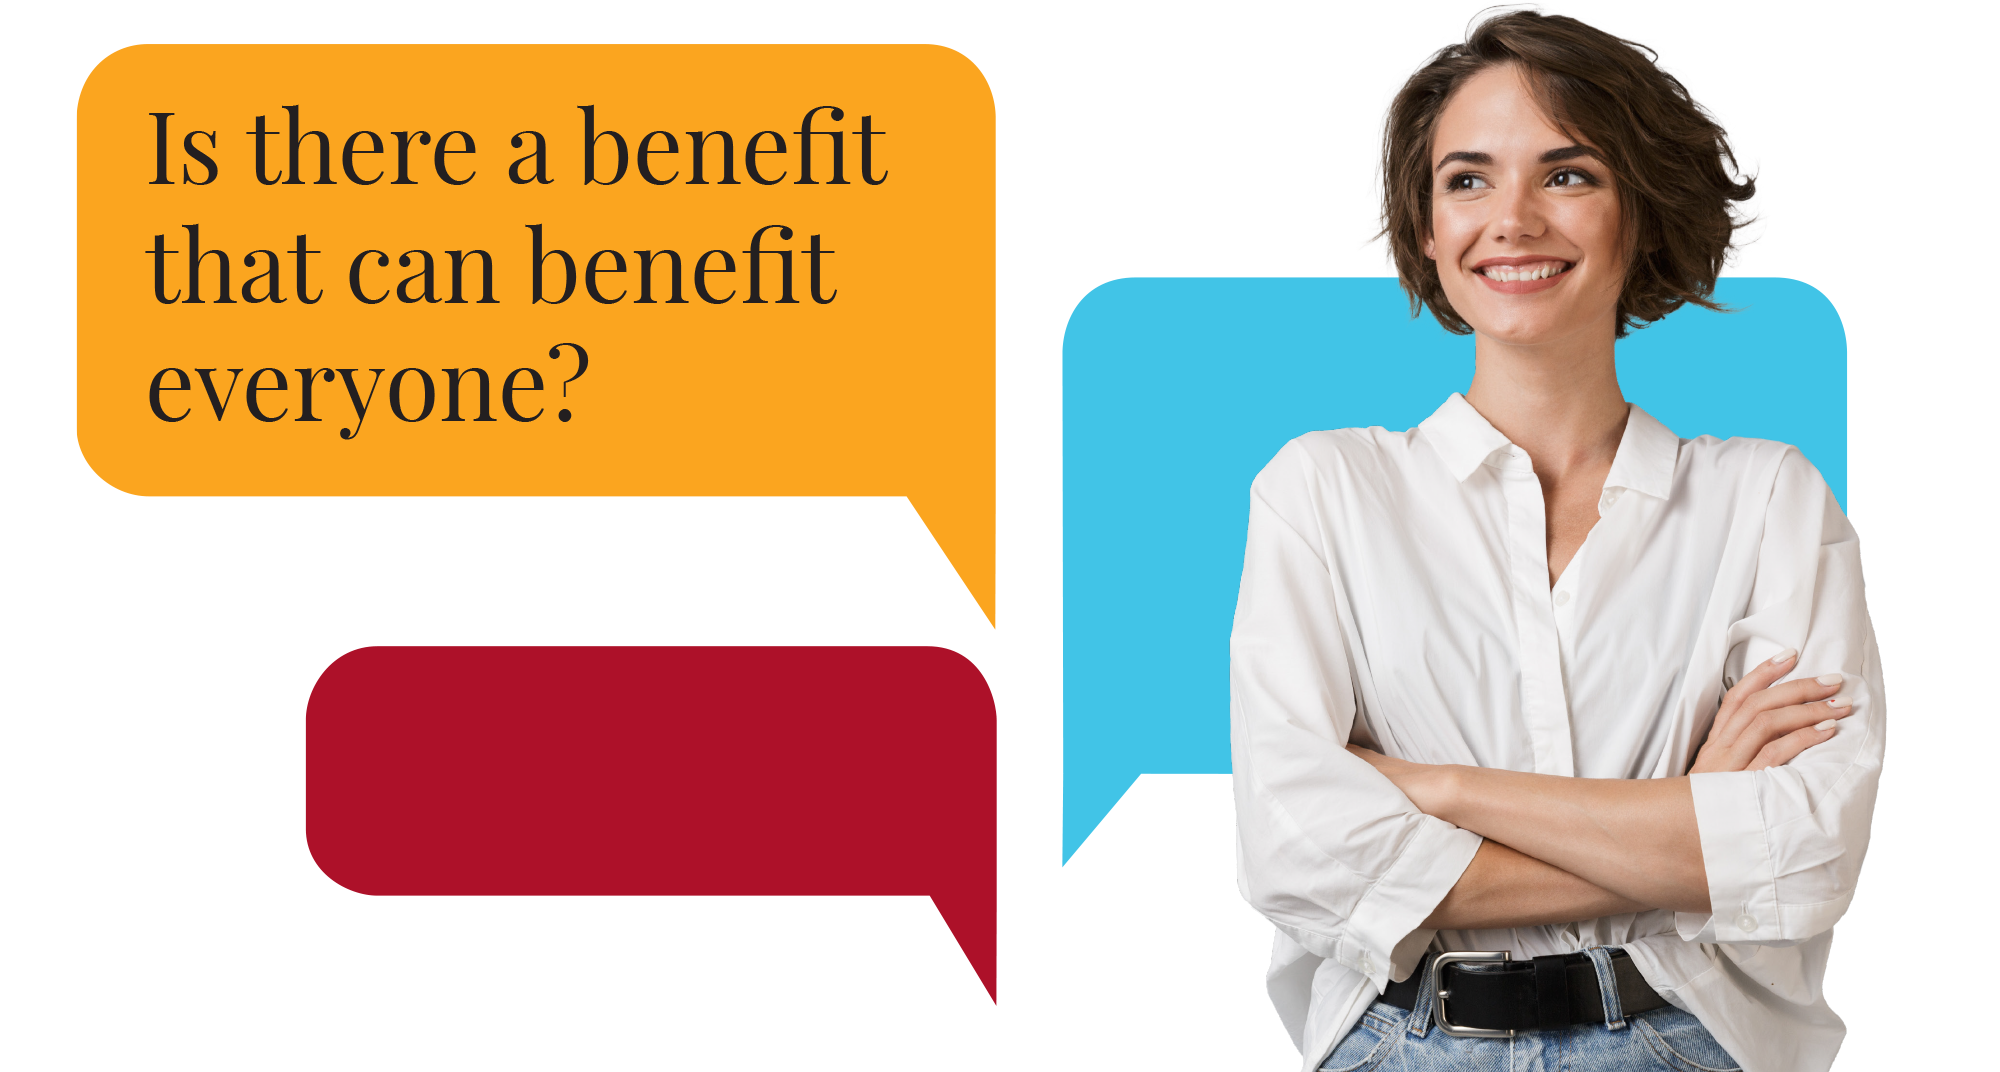 Is there a benefit that can benefit everyone?